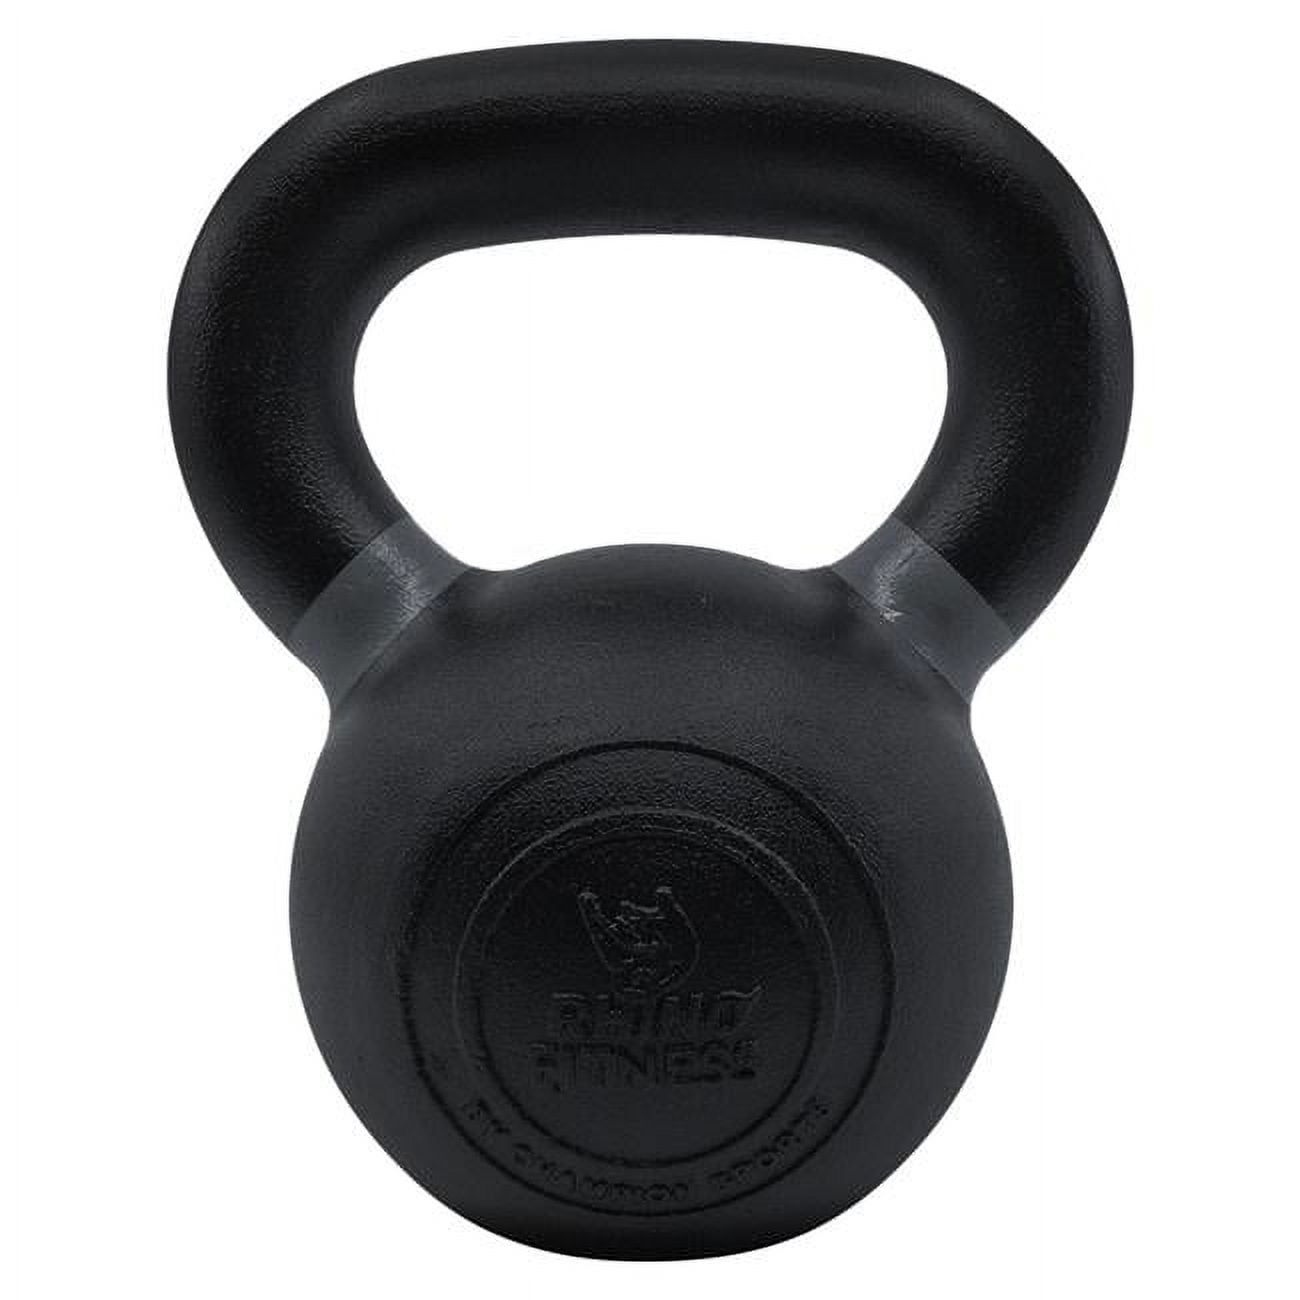 Picture of Champion Sports PCK30 7 x 5 x 9 in. 30 lbs Iron Kettlebell with Gray Handles